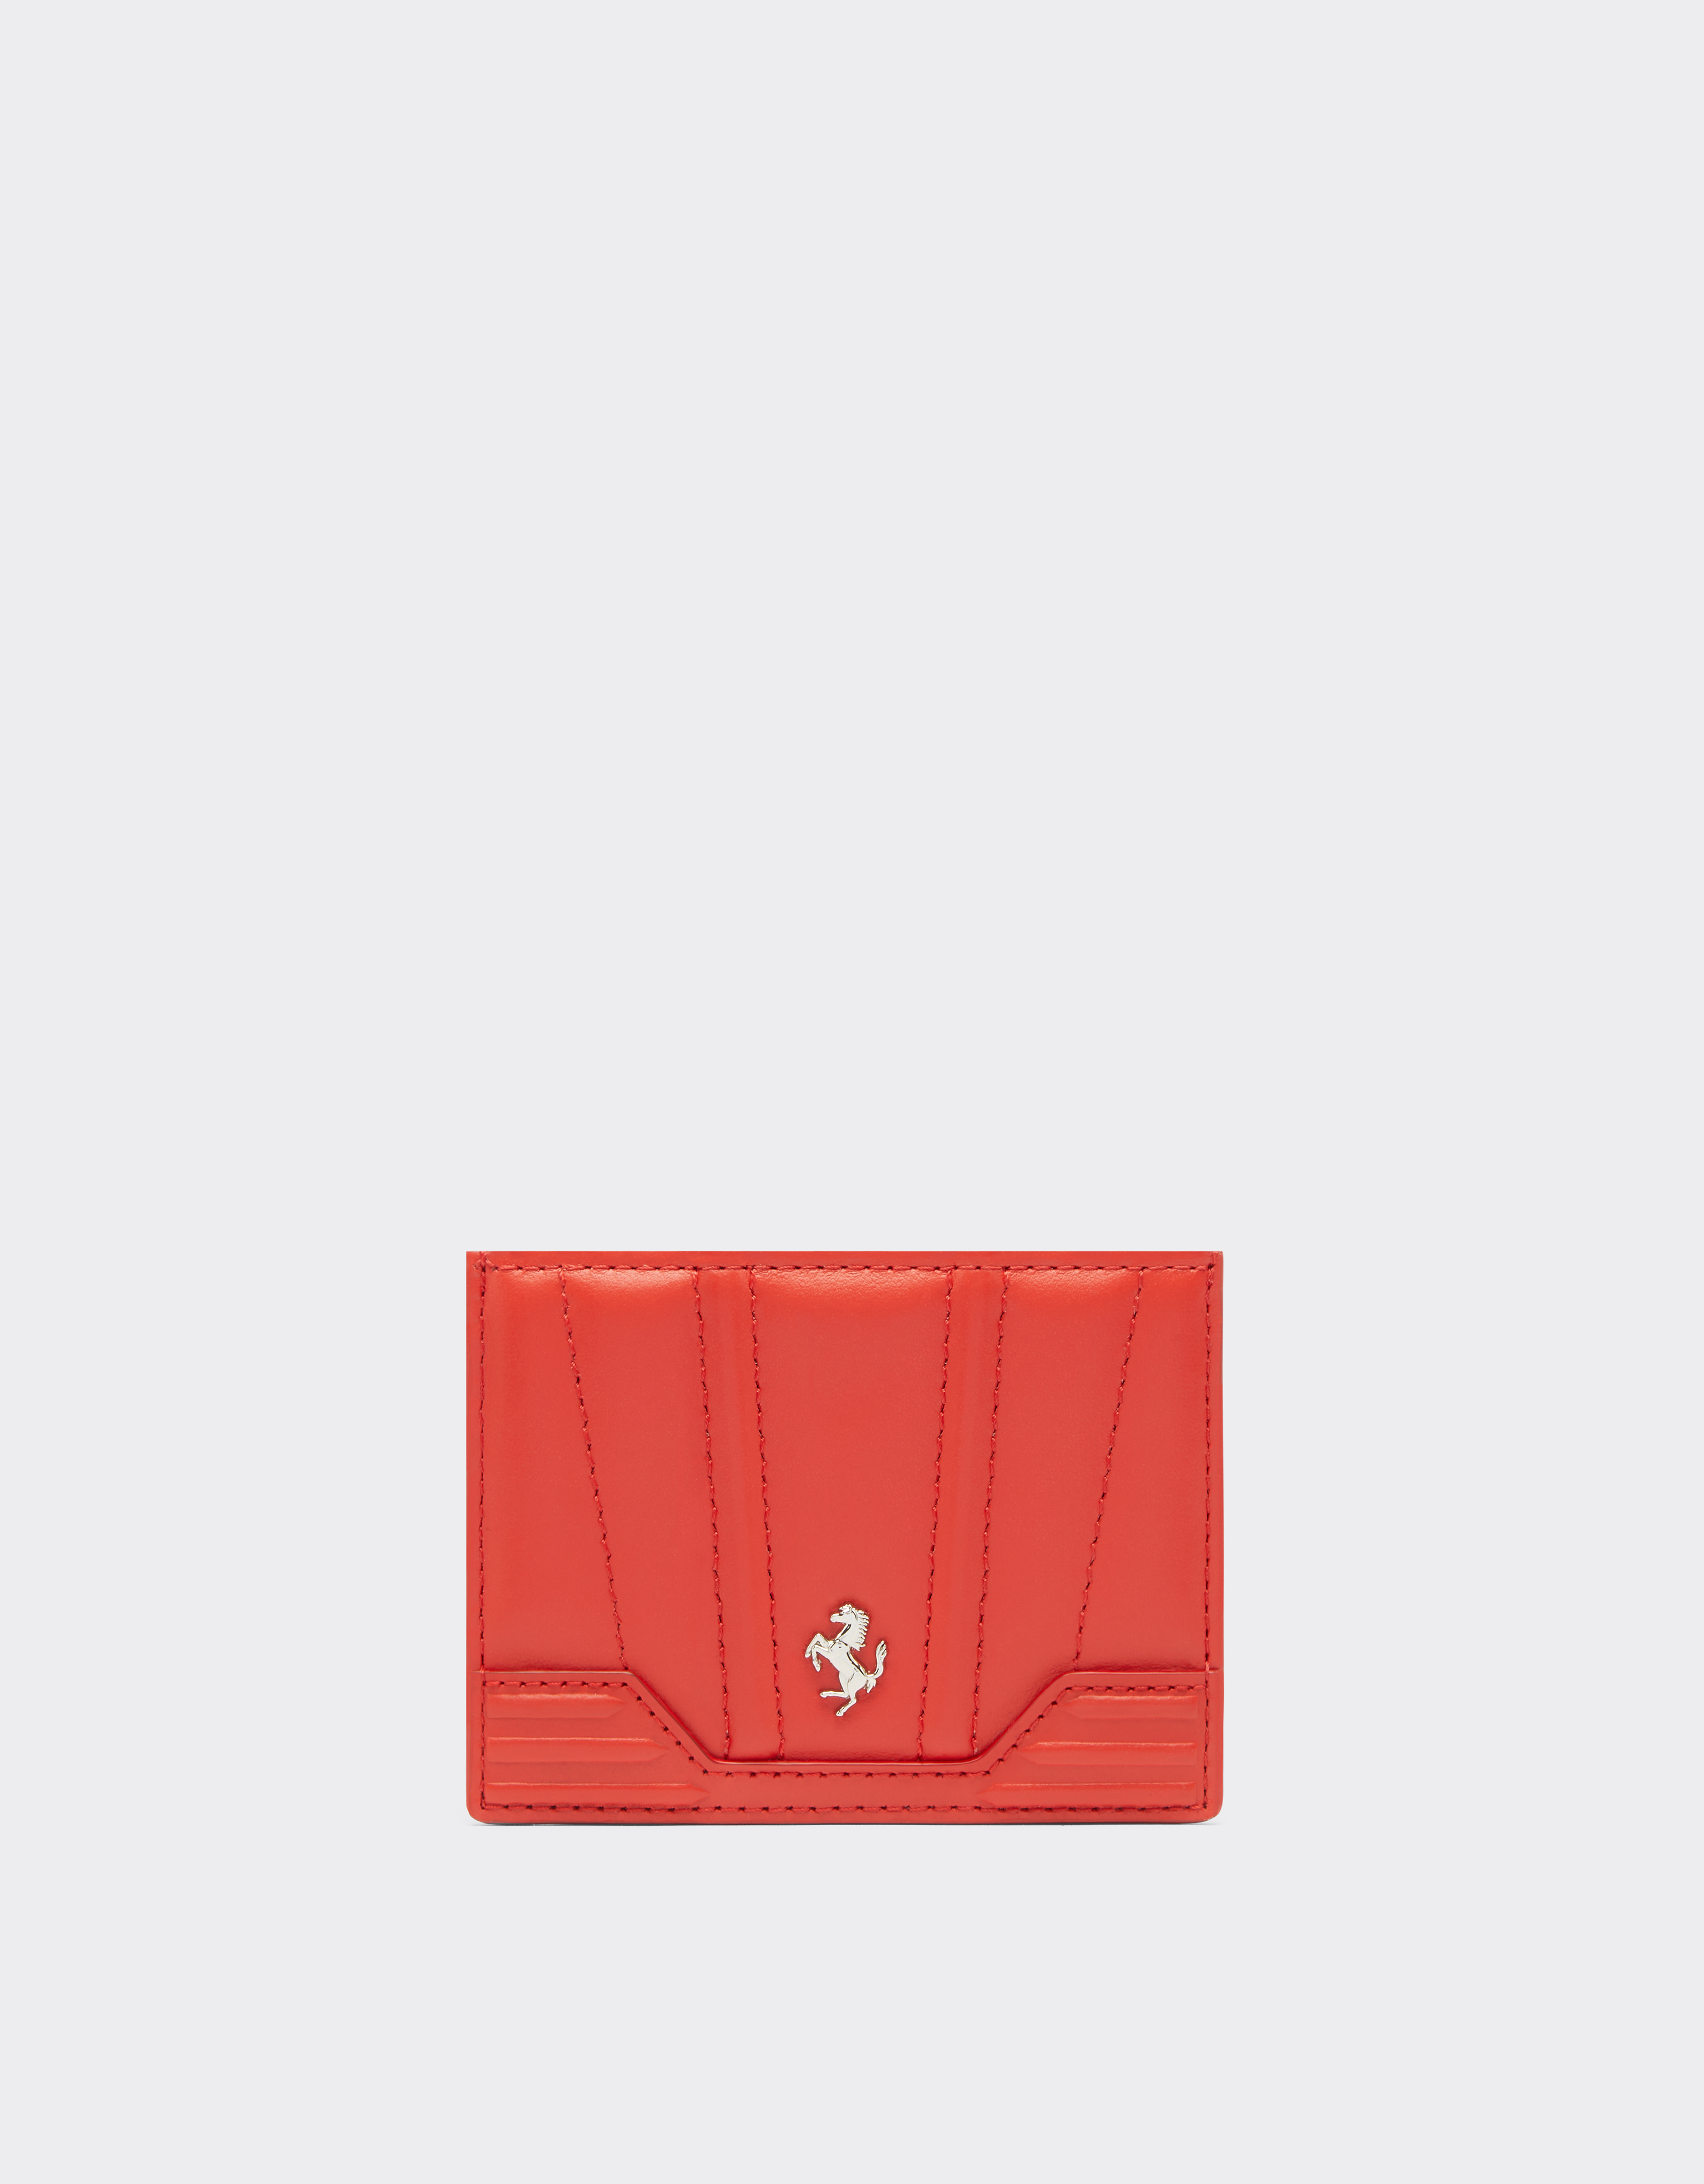 GT Ferrari leather card holder with livery motif